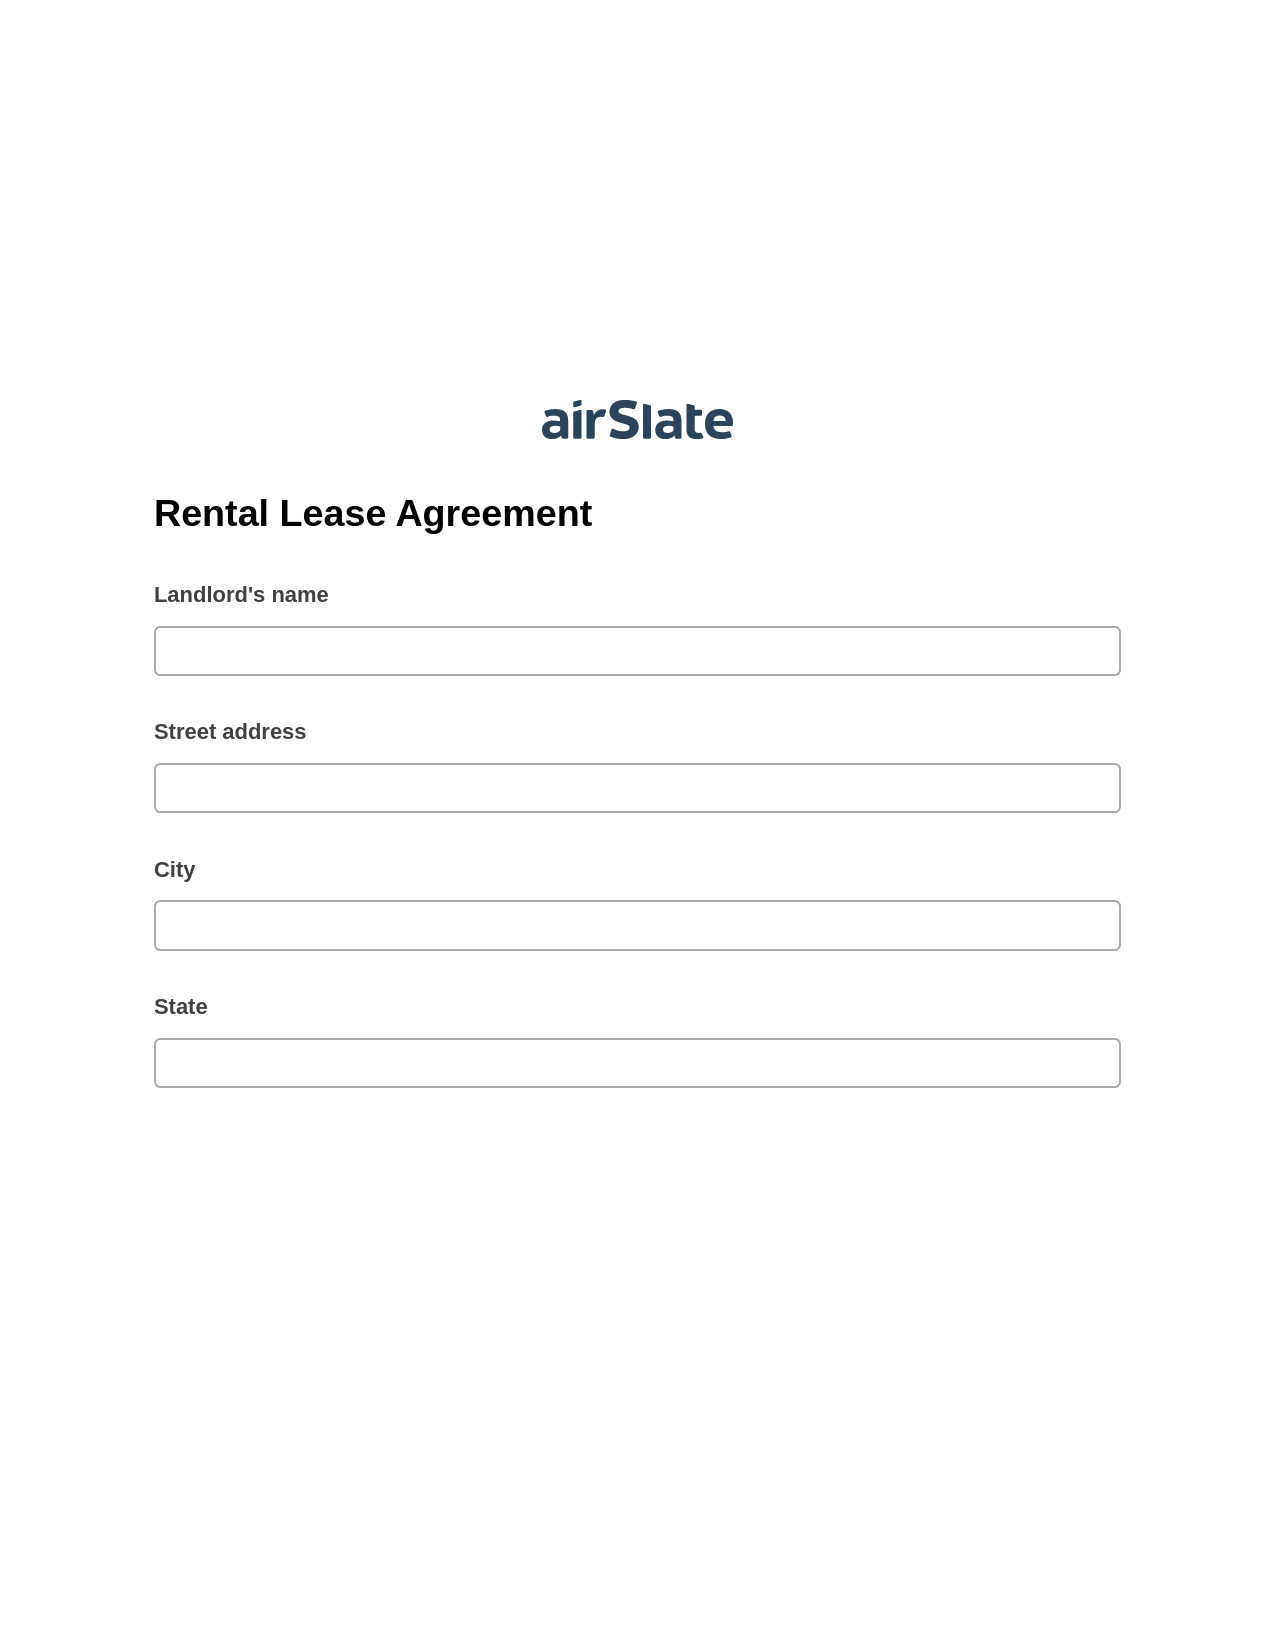 Rental Lease Agreement Pre-fill from Google Sheets Bot, Create NetSuite Records Bot, Export to Formstack Documents Bot